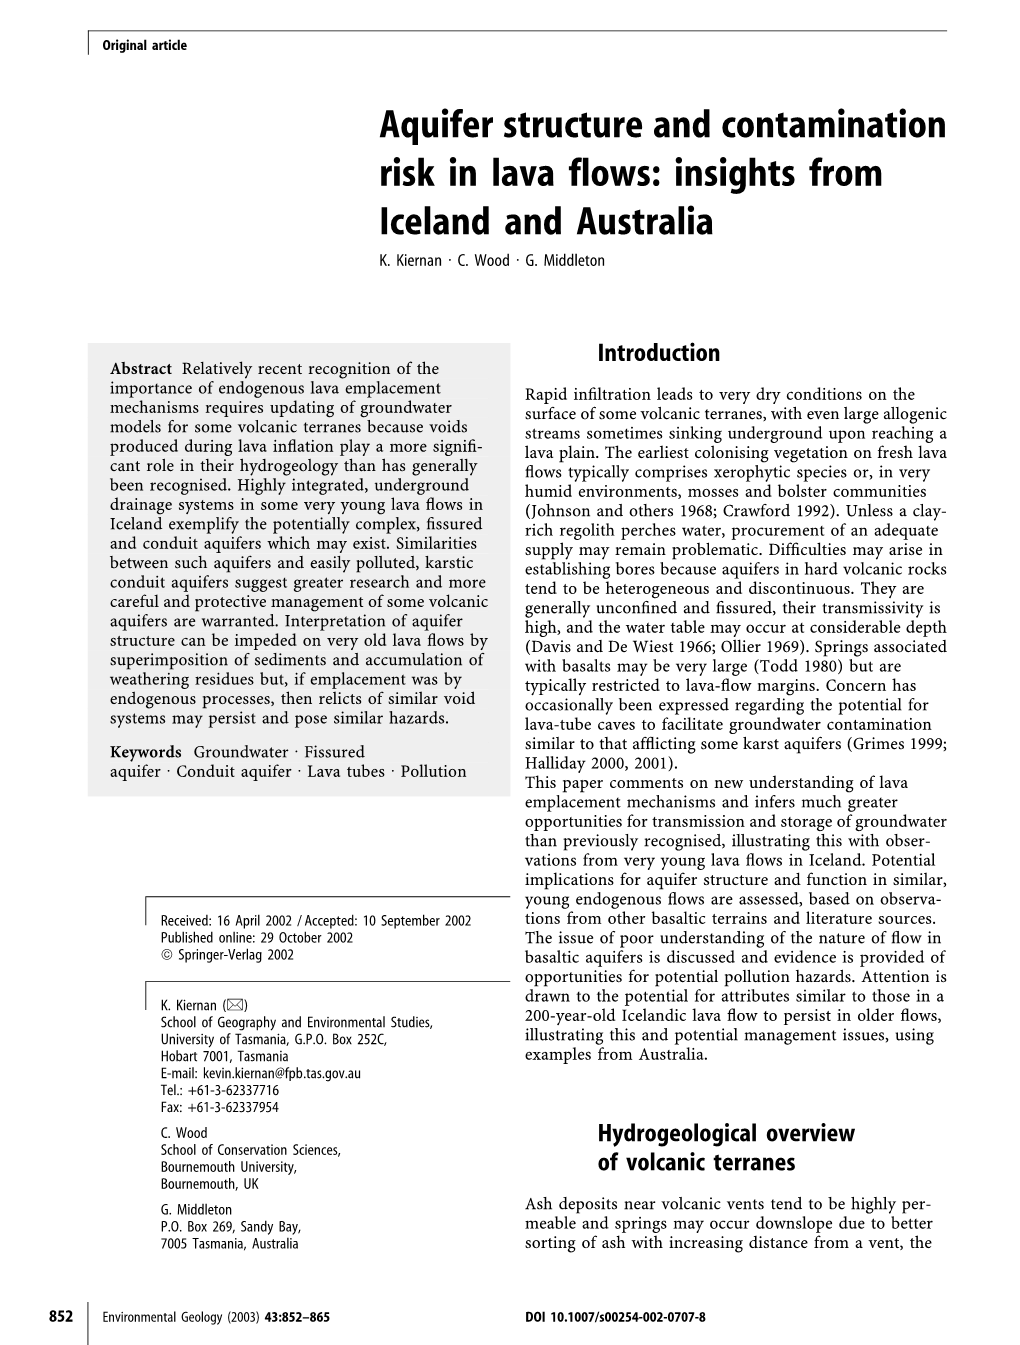 Aquifer Structure and Contamination Risk in Lava Flows: Insights from Iceland and Australia K